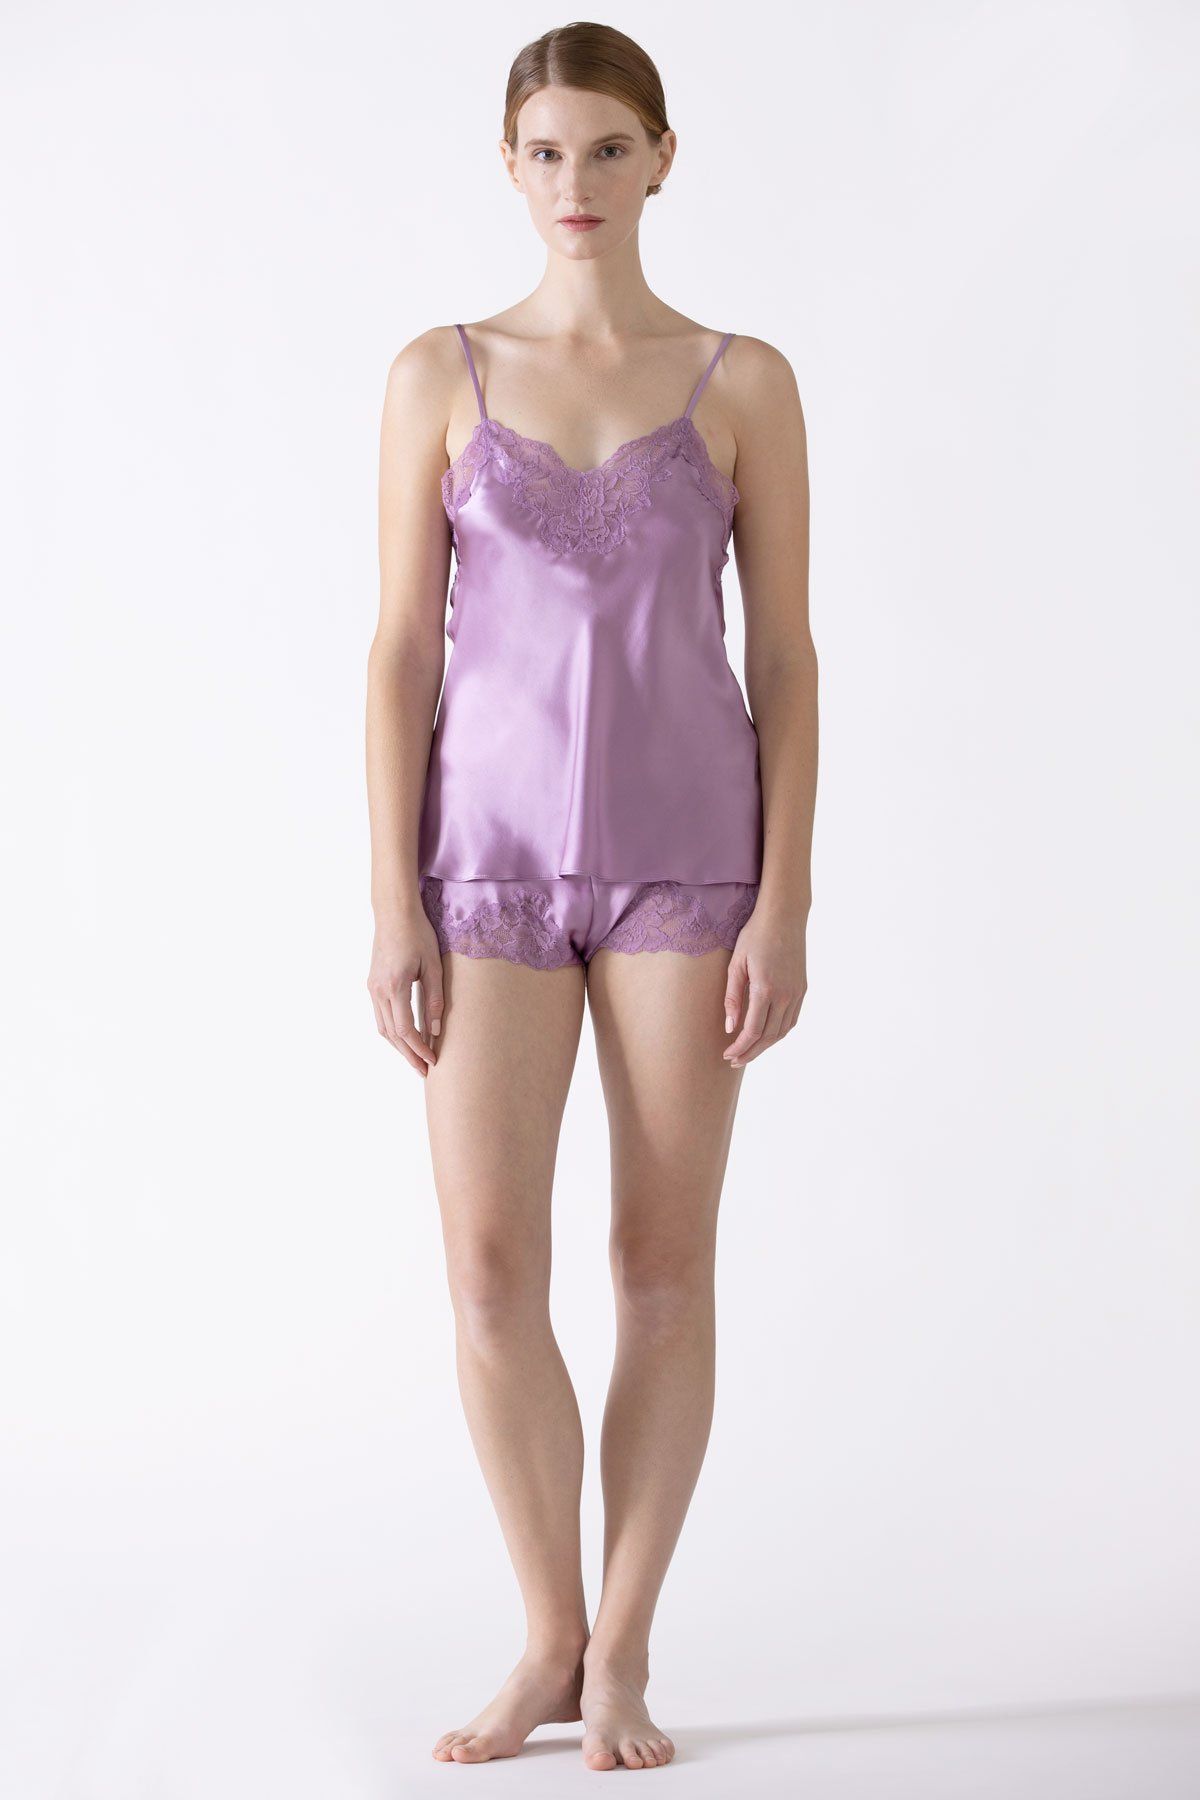 Morgan Lace Spaghetti Silk Camisole without lace hem Camisole NK iMODE dusty-lavender purple S